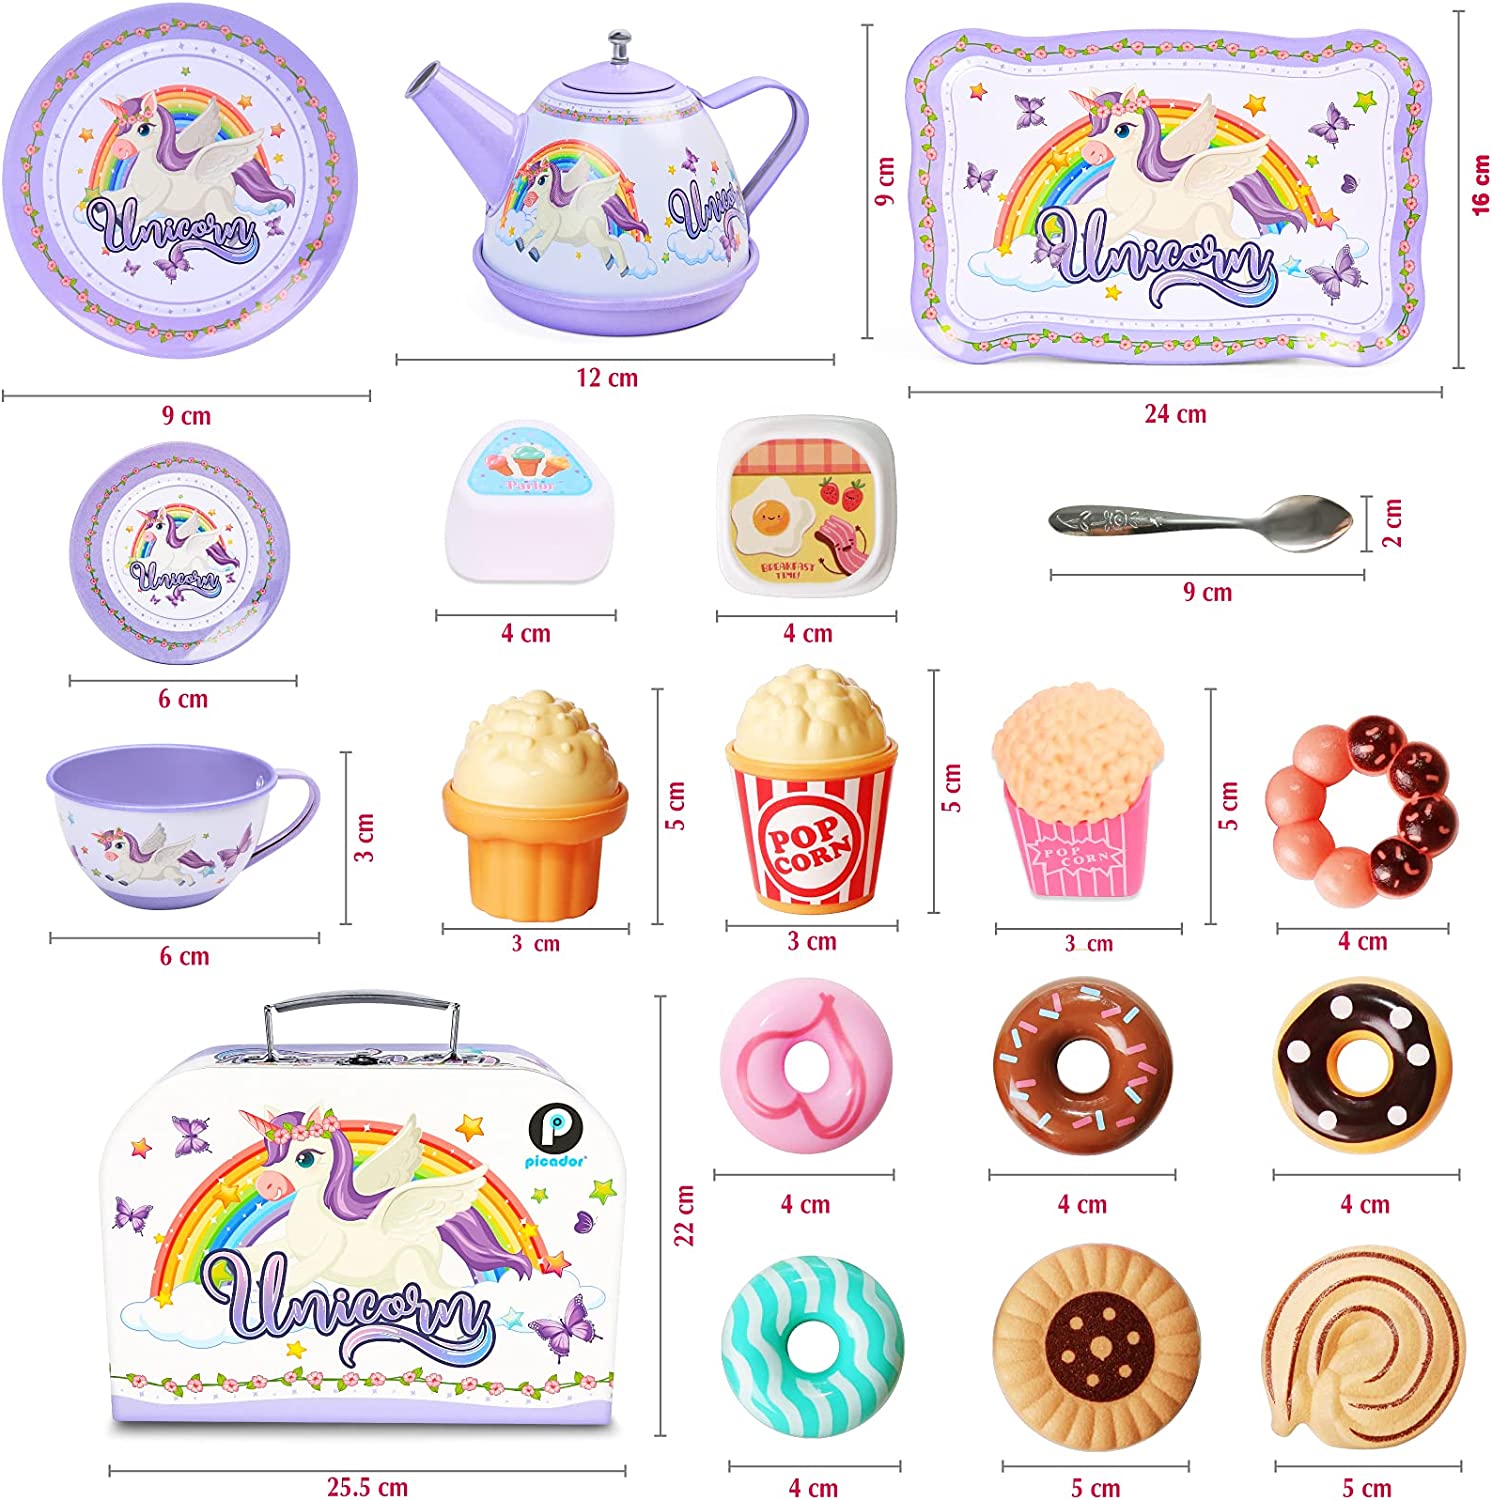 Tin Tea Party Set for Little Girls, Unicorn Party Toys Teapot Set with Storage Case And Accessories Plates, Pretend Kitchen Play Princess Age 3 4 5 6 7 8(Purple)